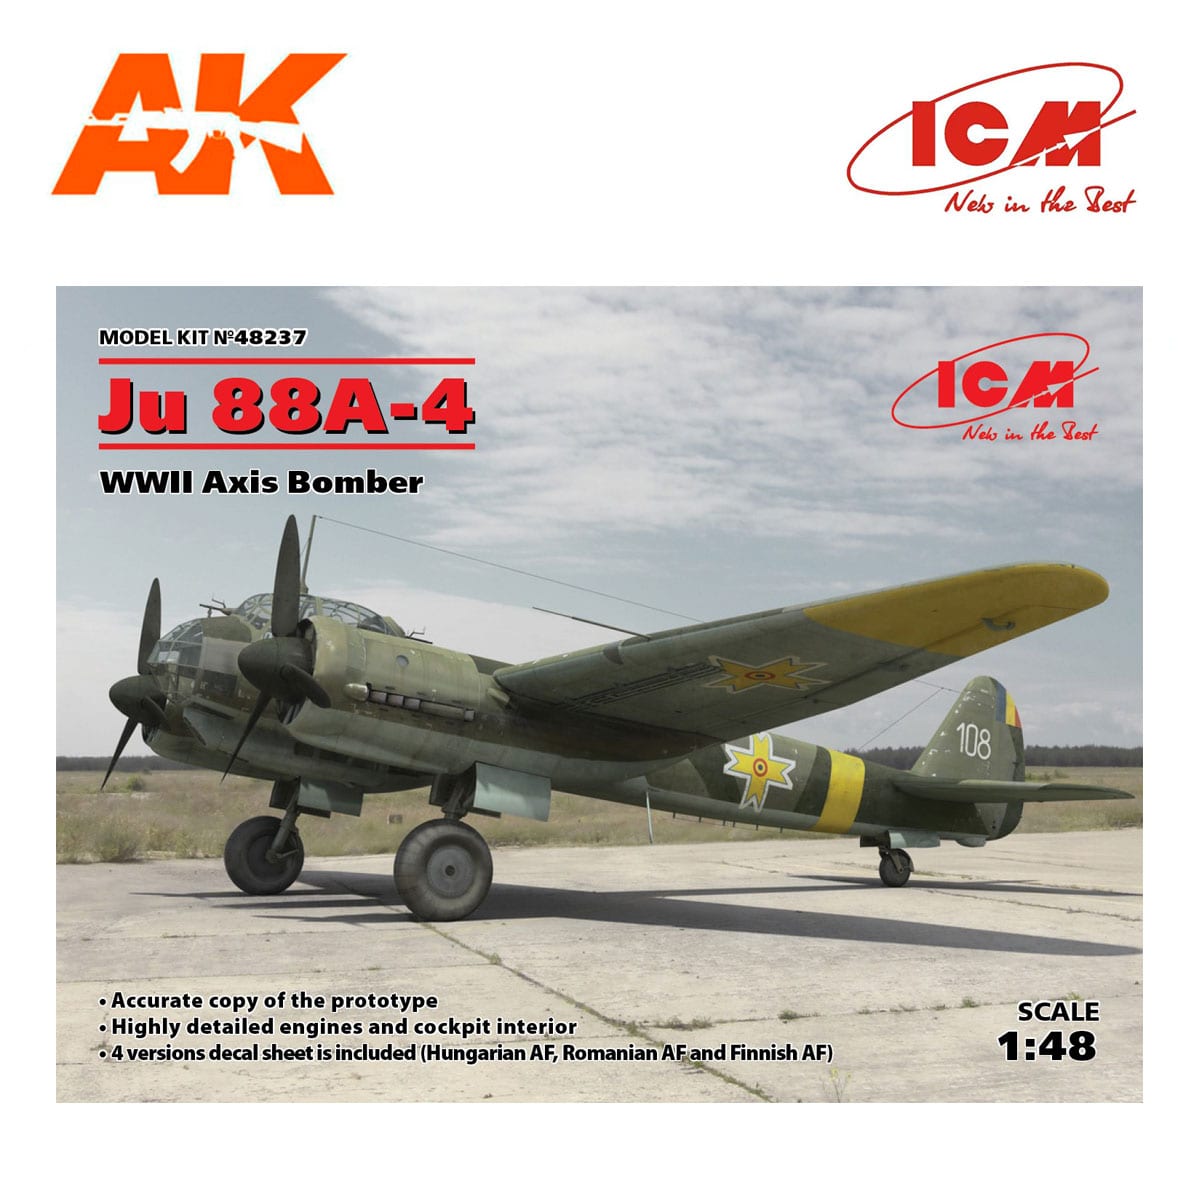 Ju 88A-4, WWII Axis Bomber 1/48